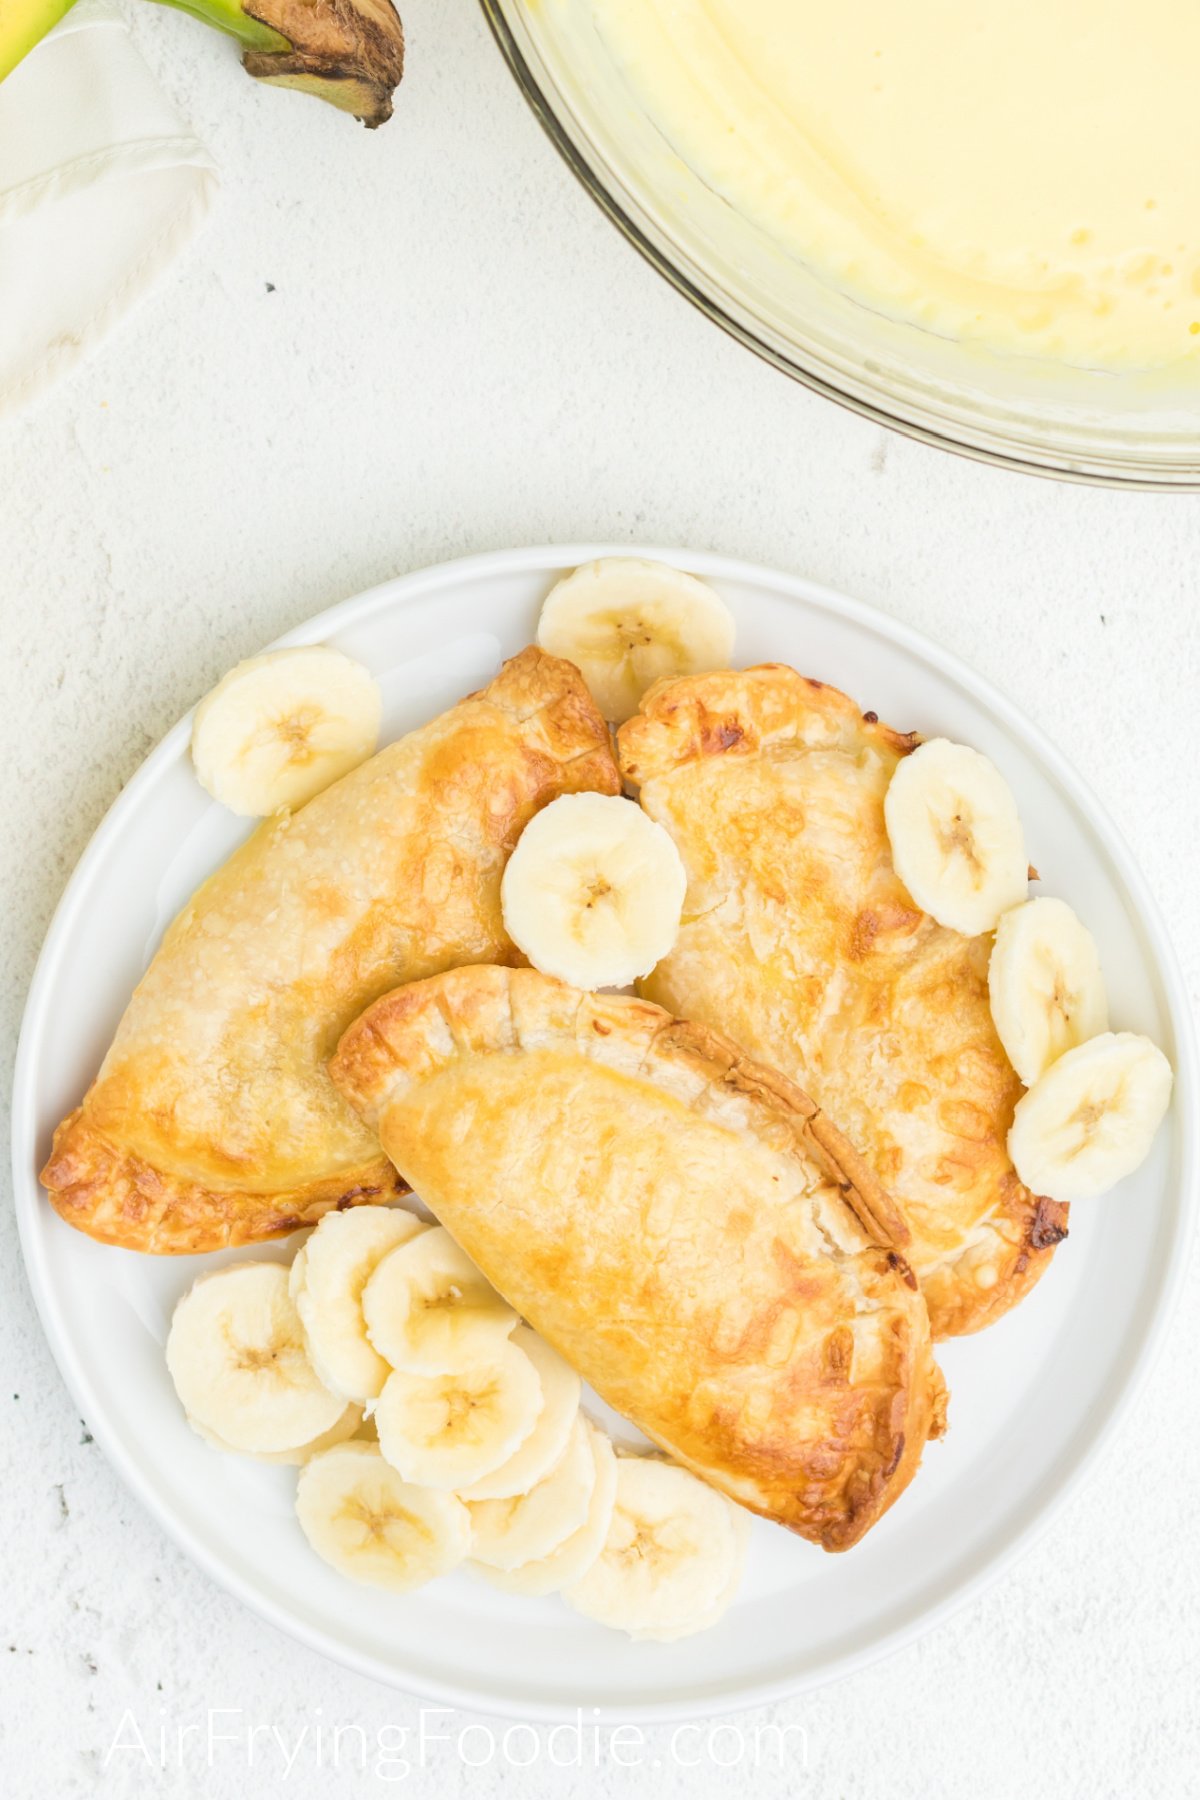 Air fried banana pudding pied on a plate with additional sliced bananas.